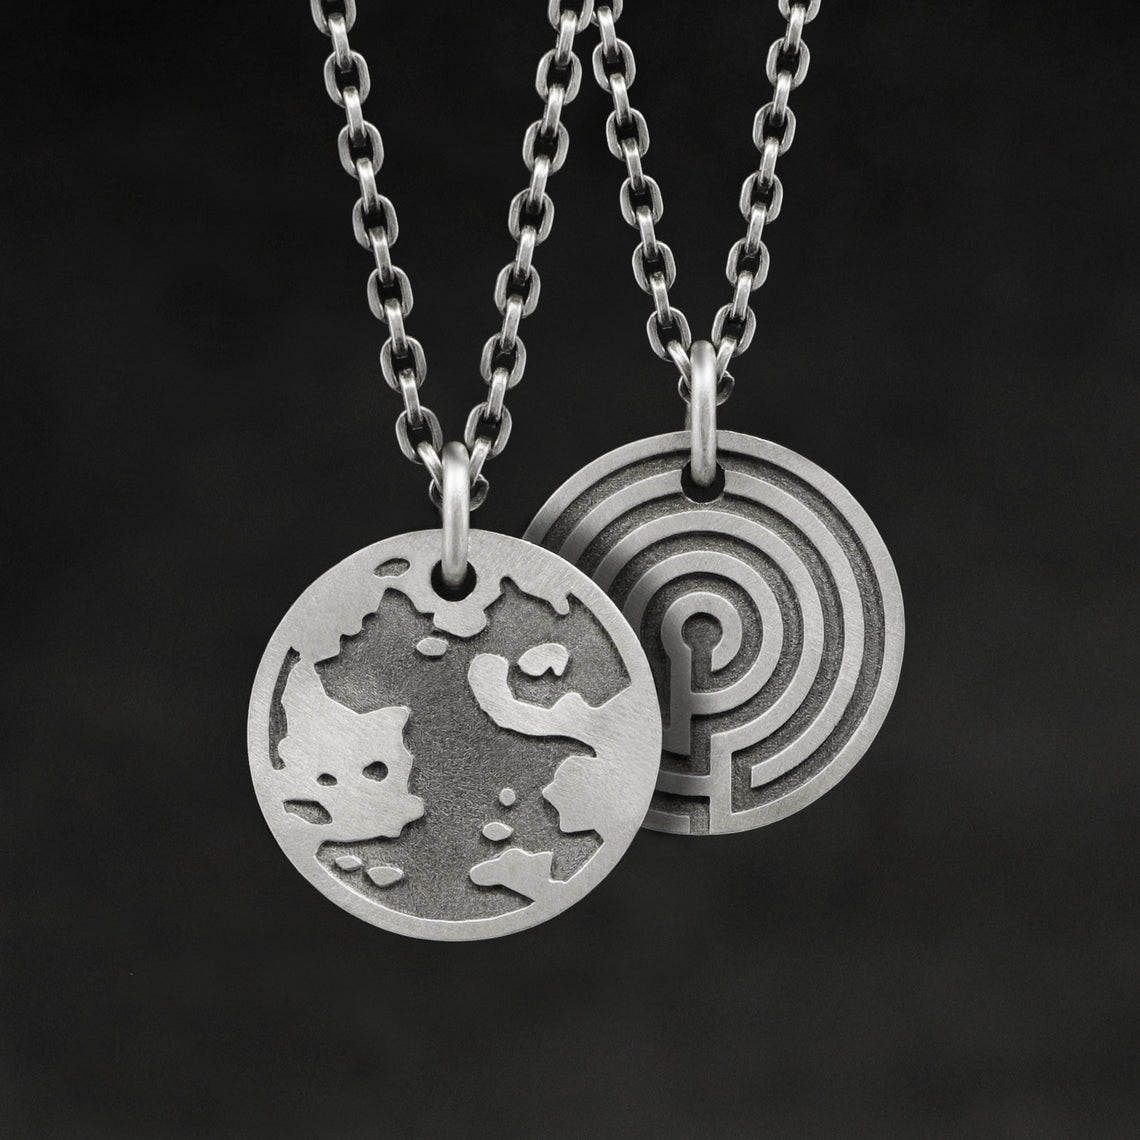 Hanging view of Sterling Silver Journey pendant and chain with endless loop necklace featuring the Map of Humanity as outward journey and labyrinth as inward journey by Caps Brothers